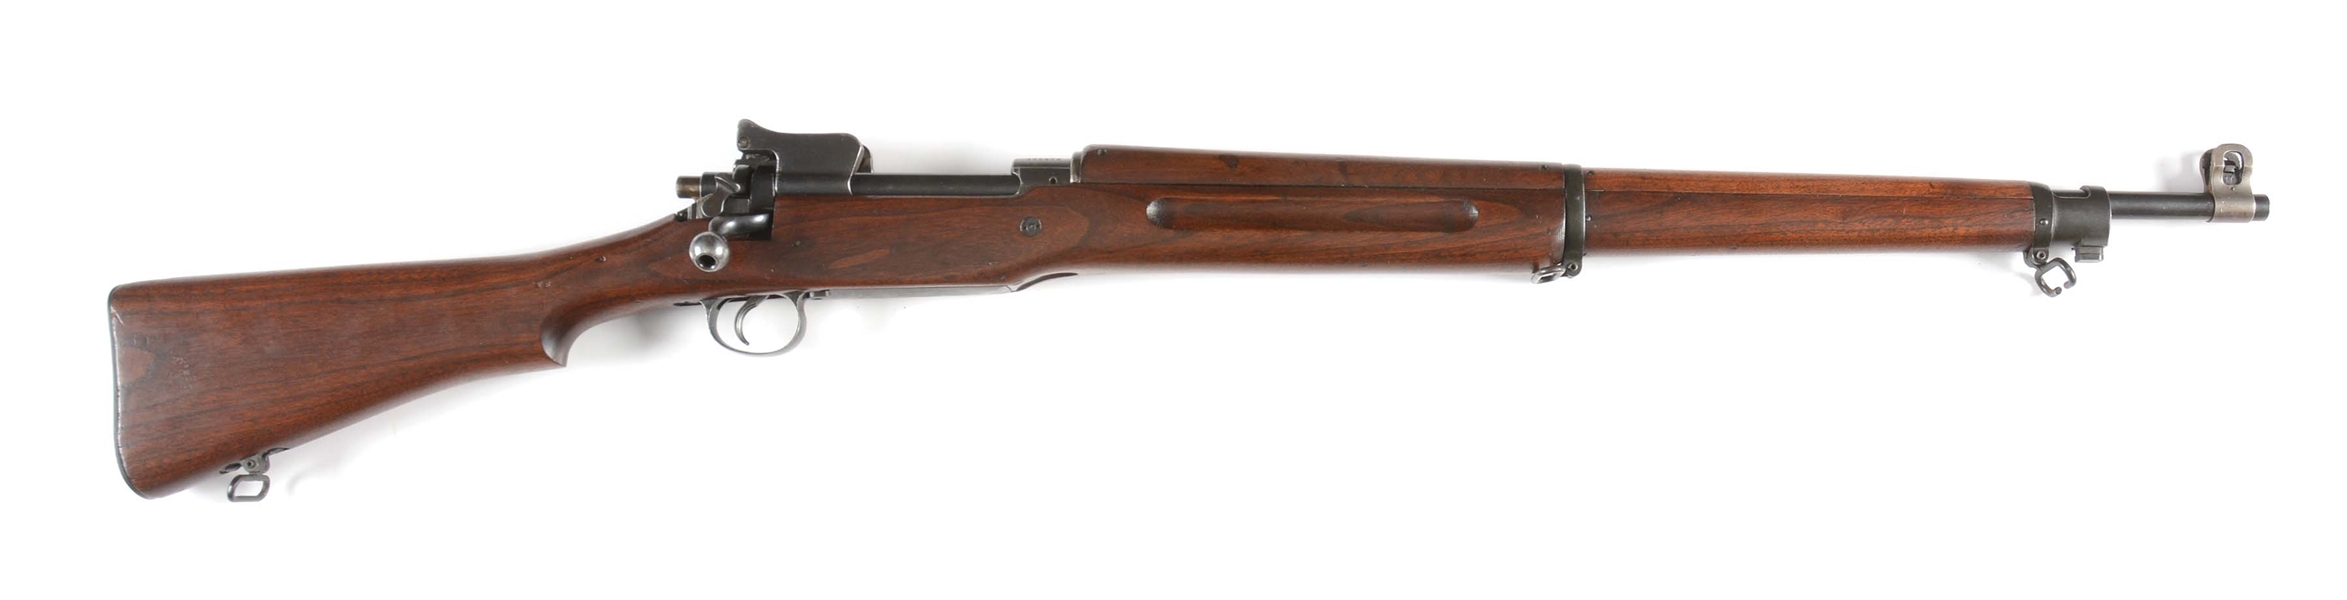 (C) WINCHESTER 1917 BOLT ACTION .30-06 MILITARY RIFLE.